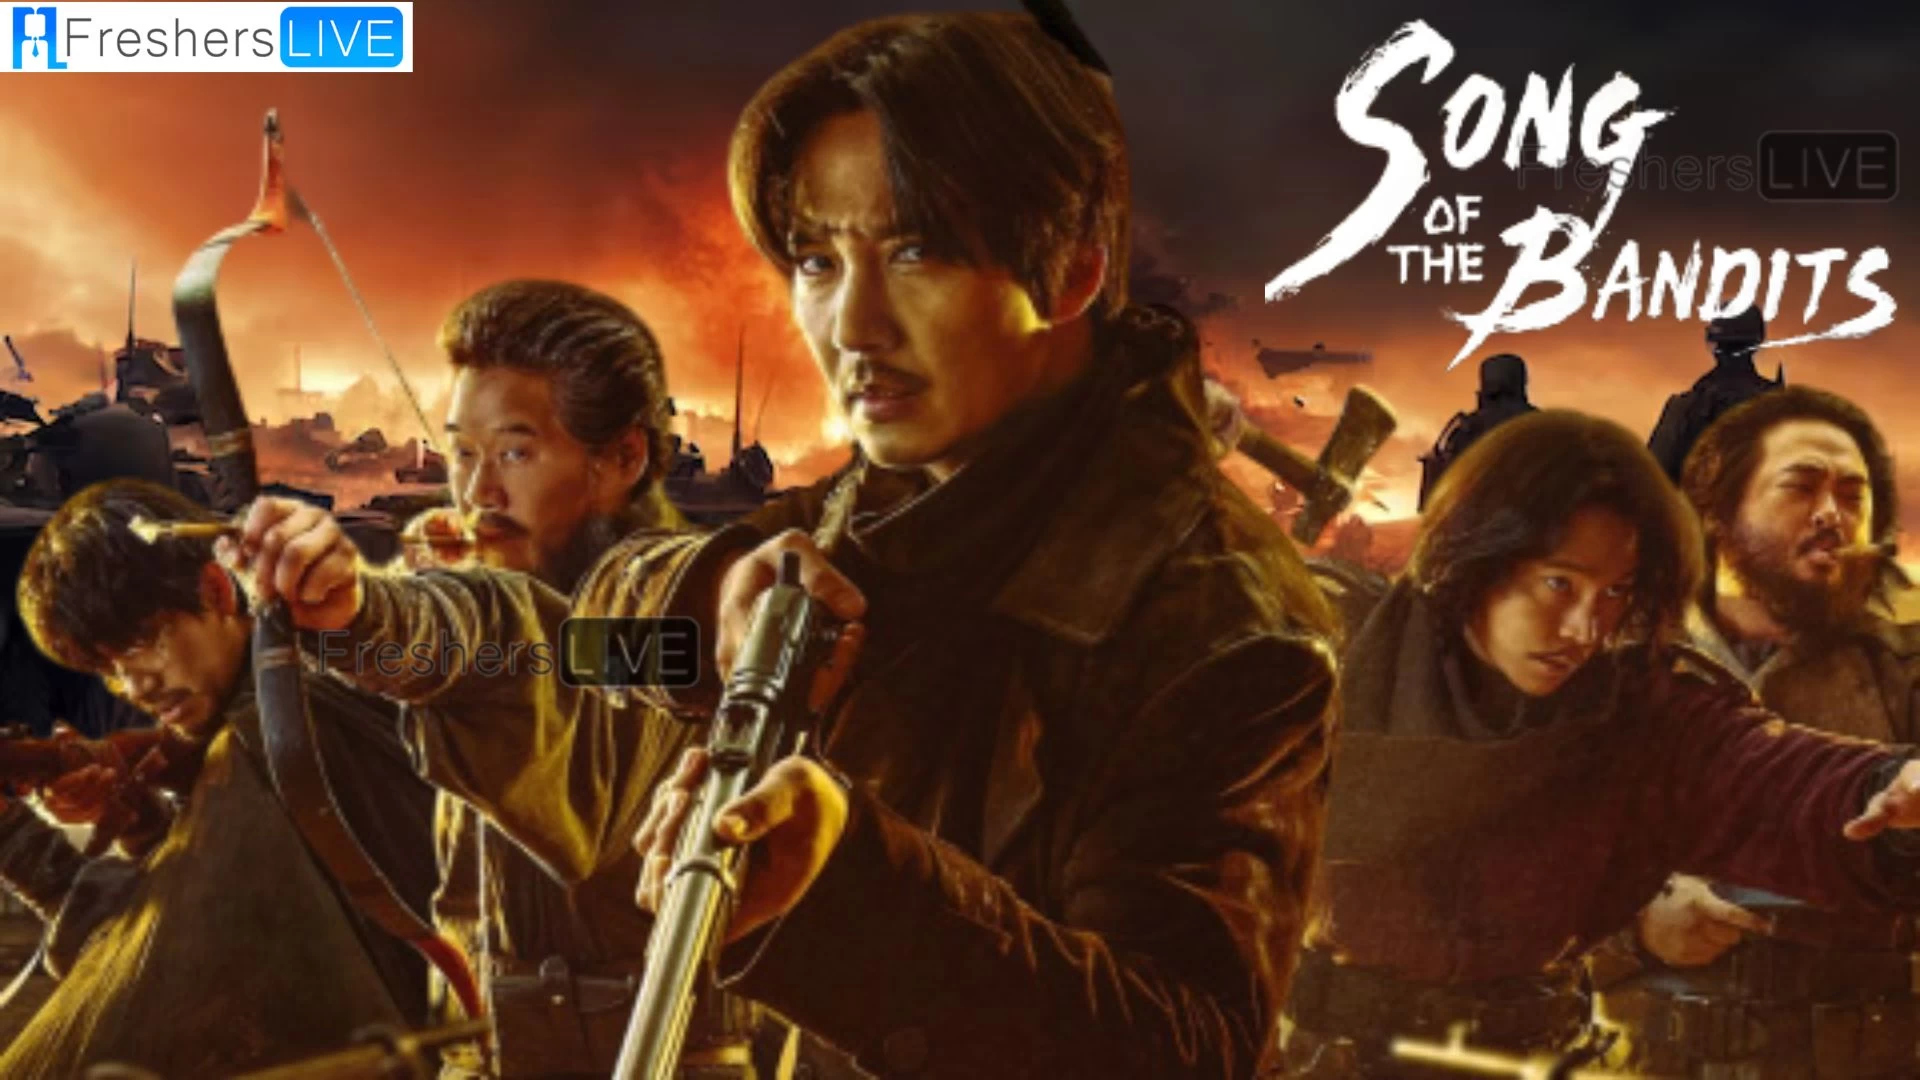 Song of the Bandits Season 1 Episode 9 Ending Explained, Release Date, Plot, Cast, Where to Watch and More